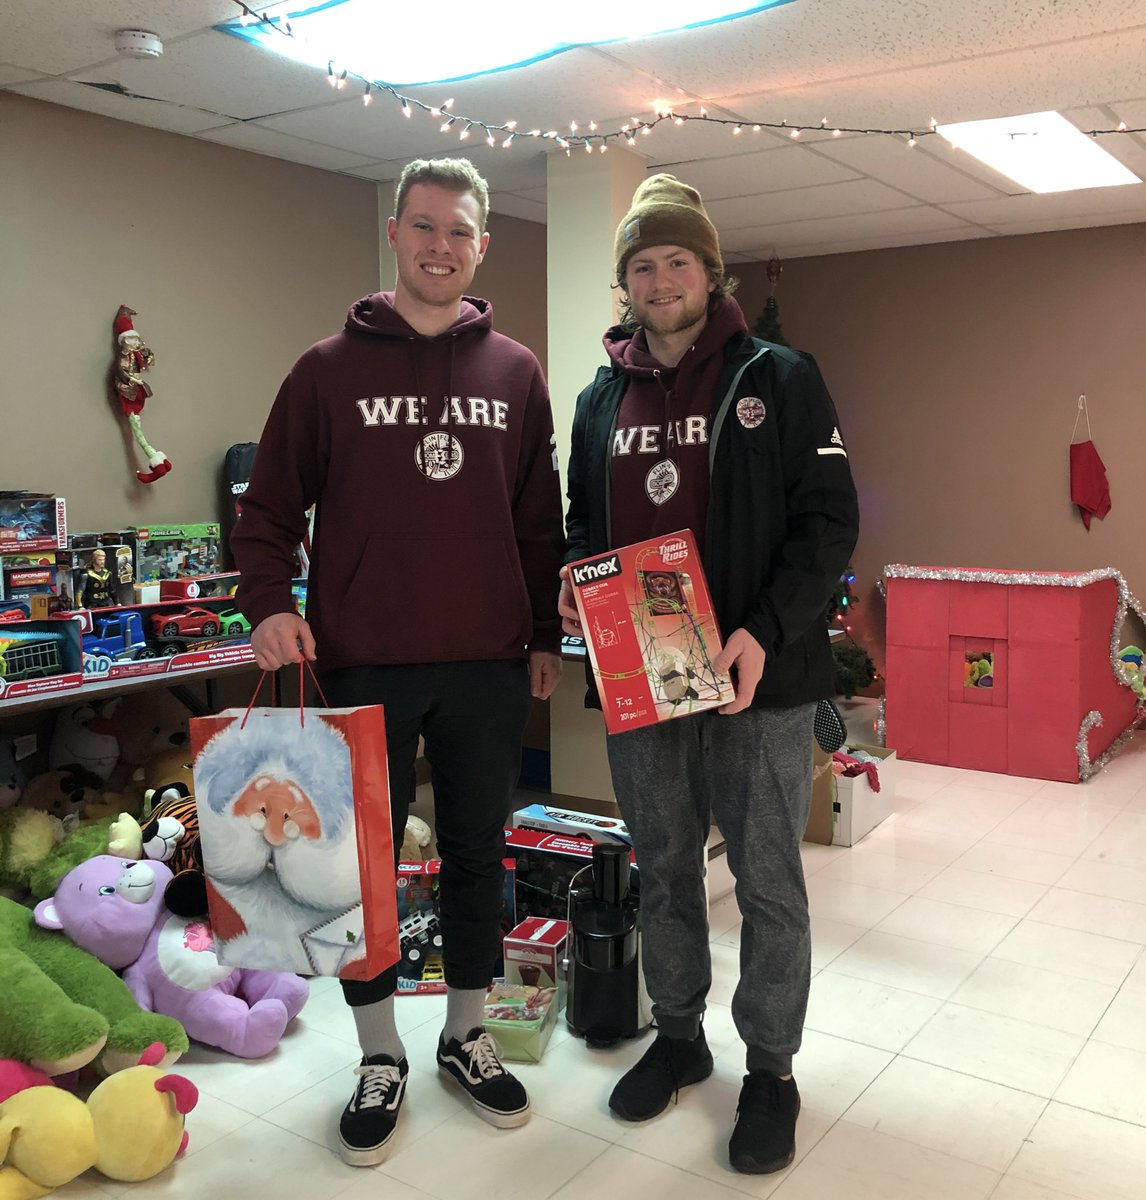 @calebfranklin7 and I stopped by the Friendship Centre in Flin Flon, to donate a few things that will be given to families who may be unable to get gifts for there kids on Christmas. Hopefully we can make someone smile come Christmas morning! #communitypride @FFBombers @theSJHL